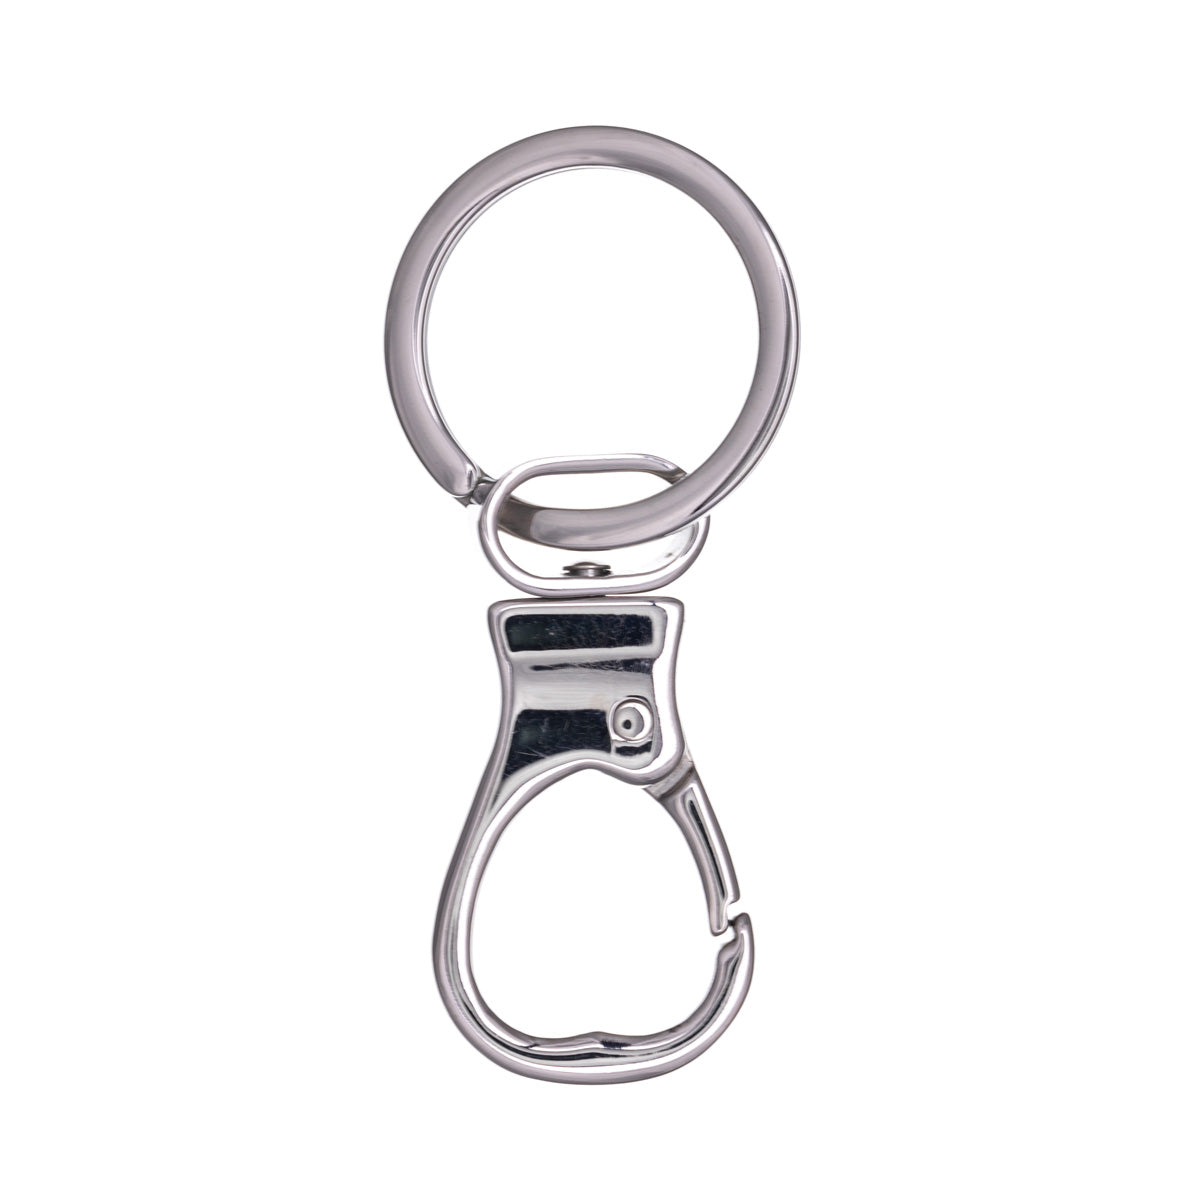 Steel key ring with quick lock carabiner (Steel 316L)